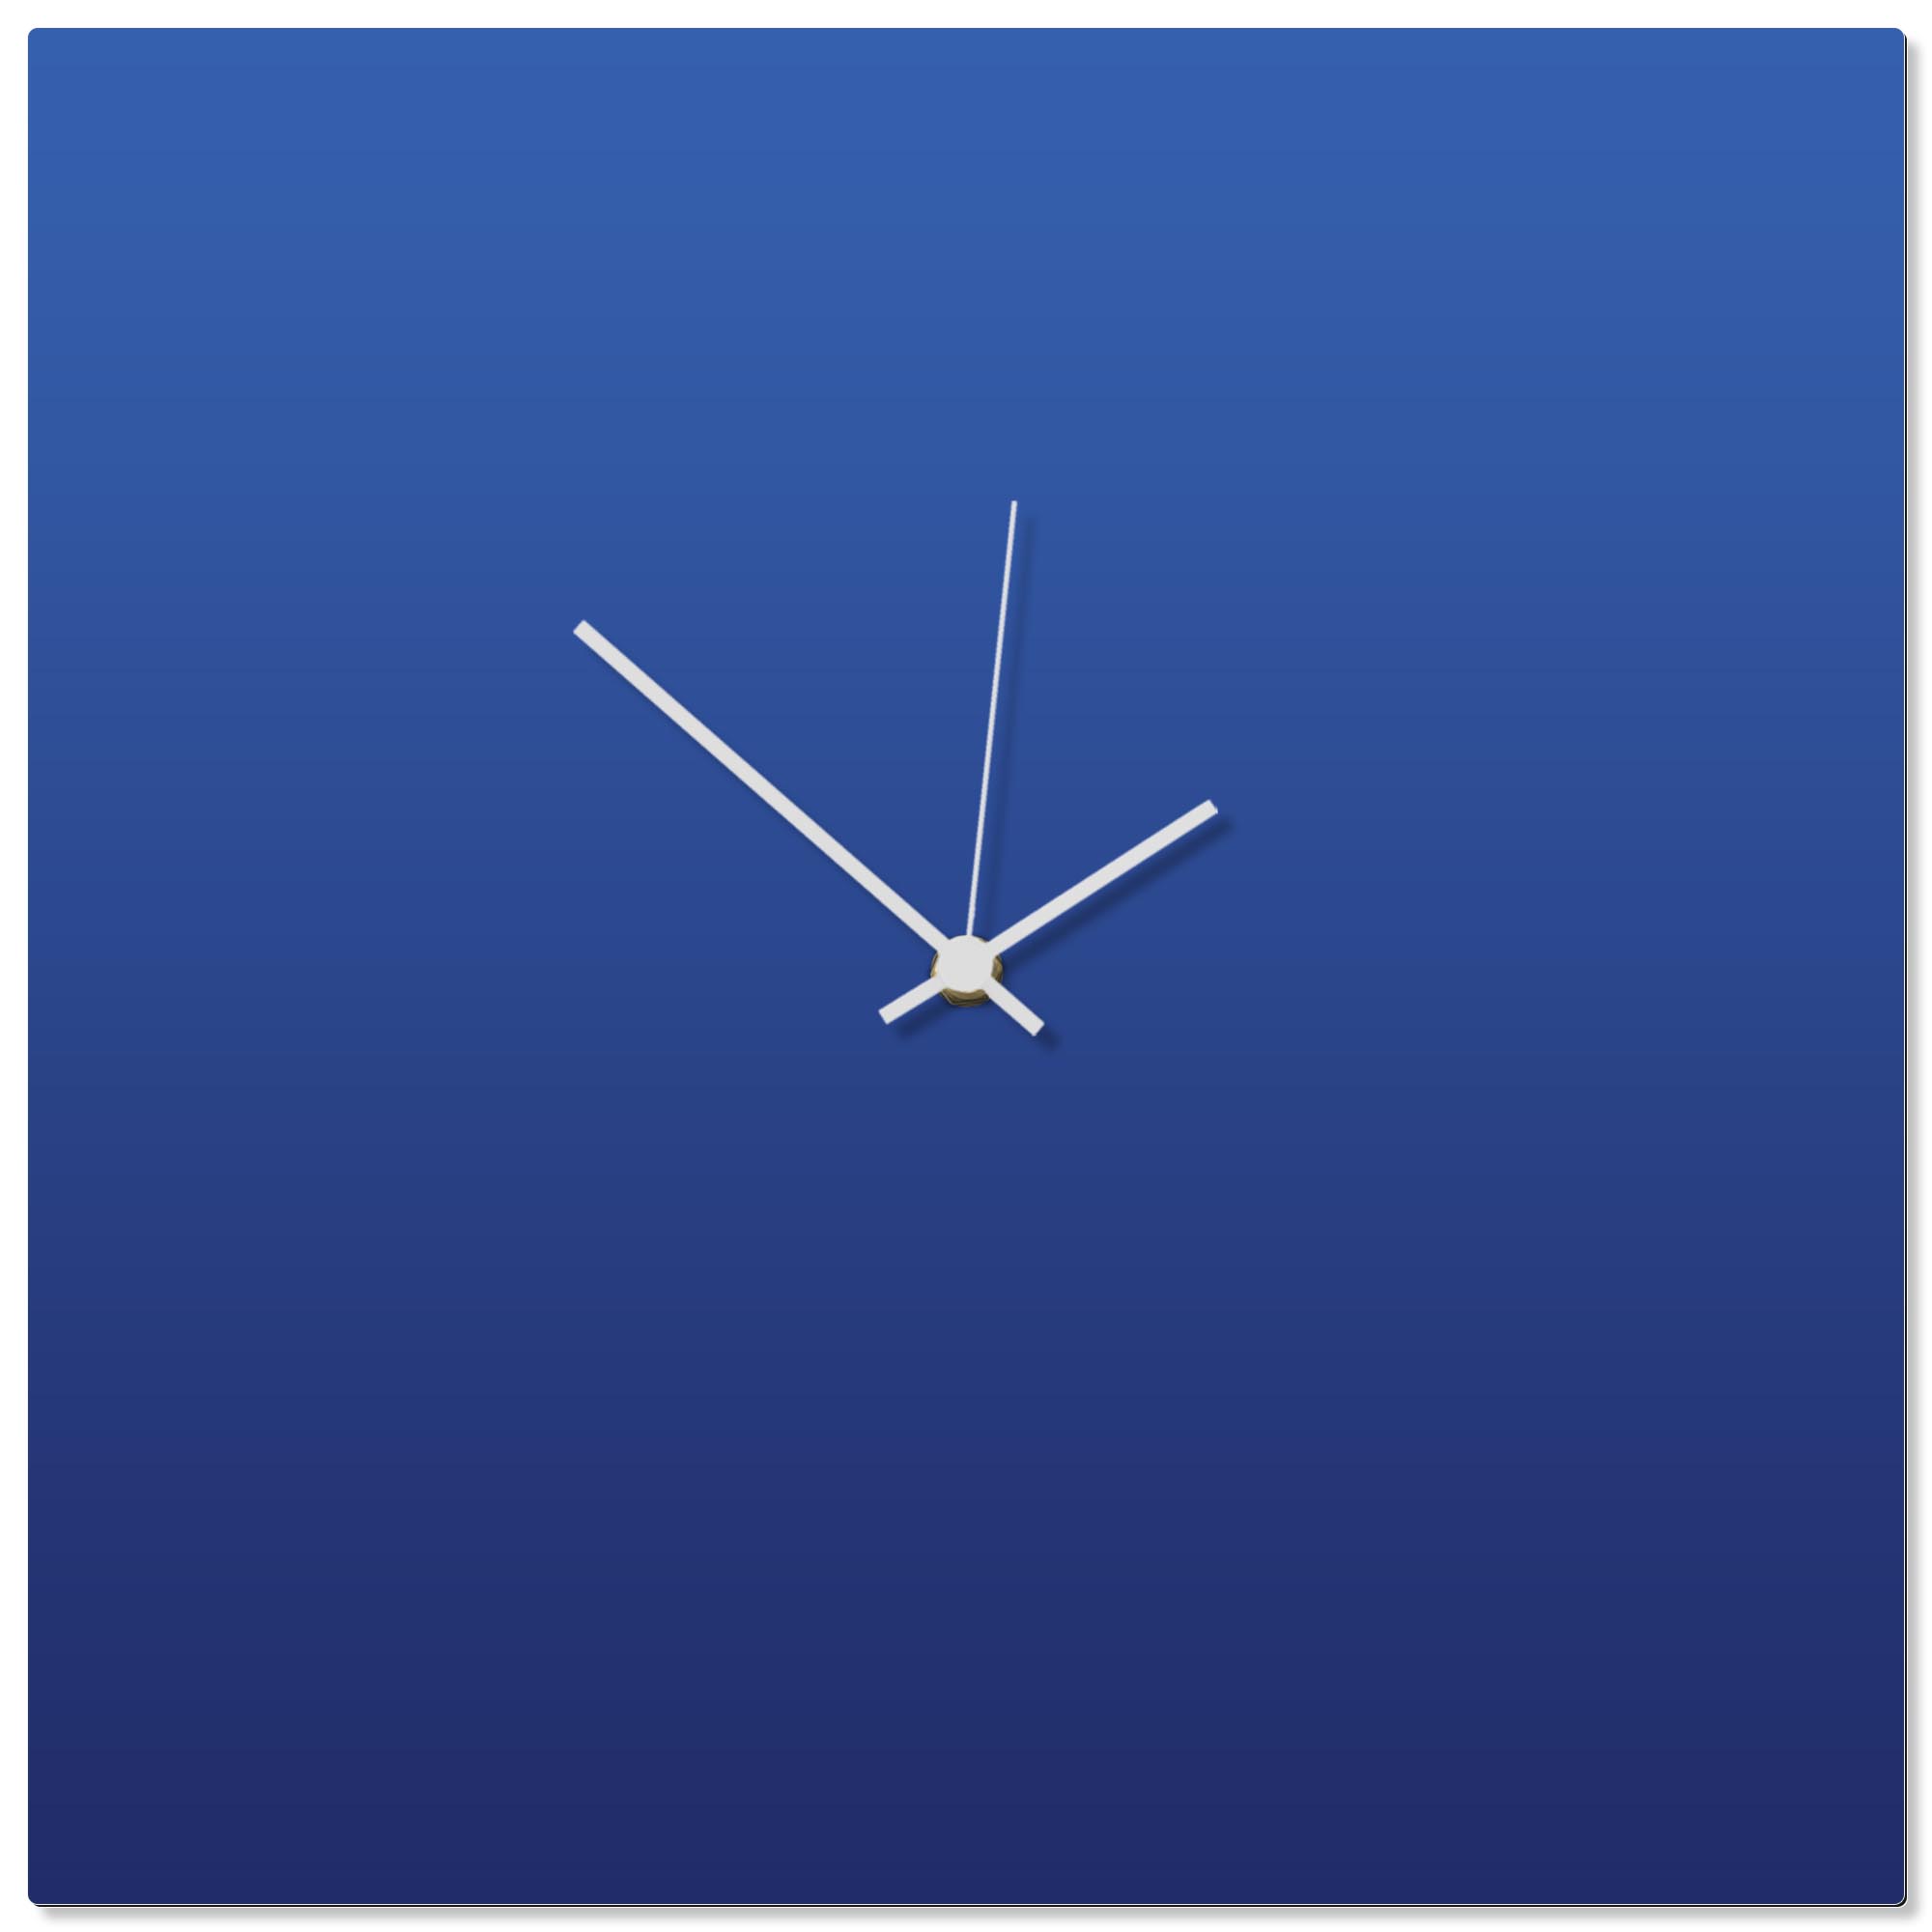 Blueout White Square Clock 16x16in. Aluminum Polymetal